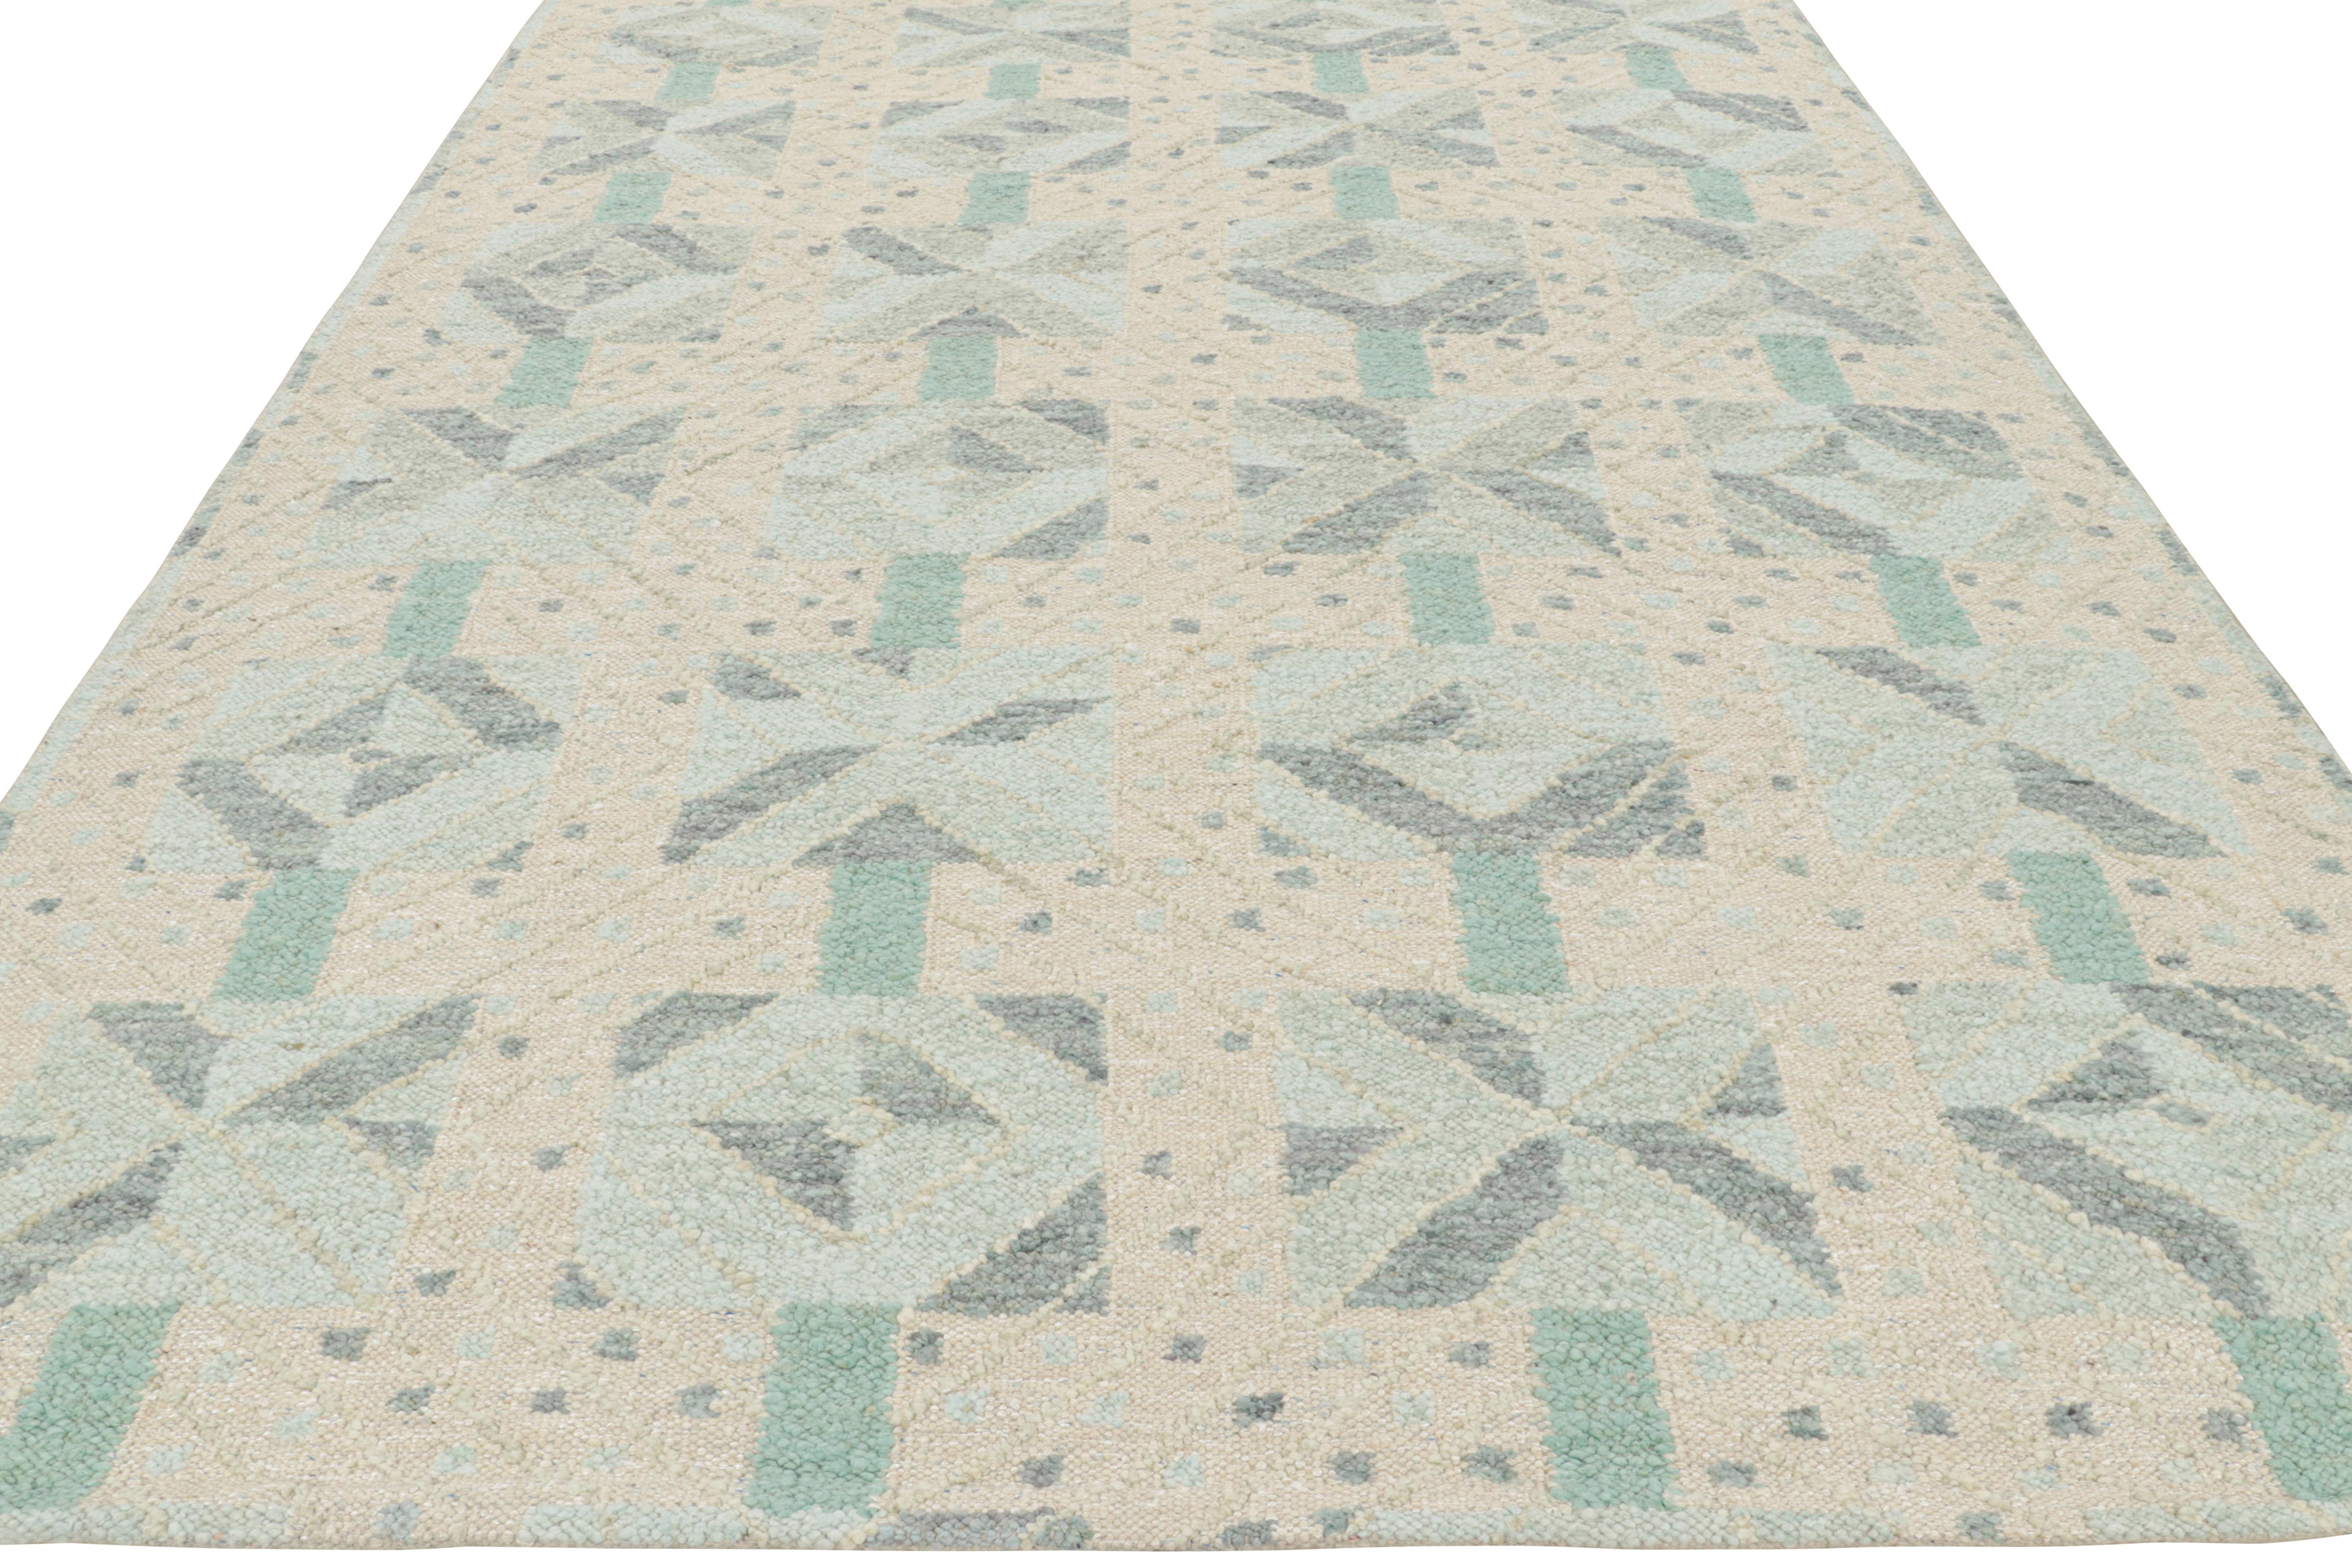 Hand-Woven Rug & Kilim’s Scandinavian Style Rug with Blue, Turquoise and Off-white For Sale